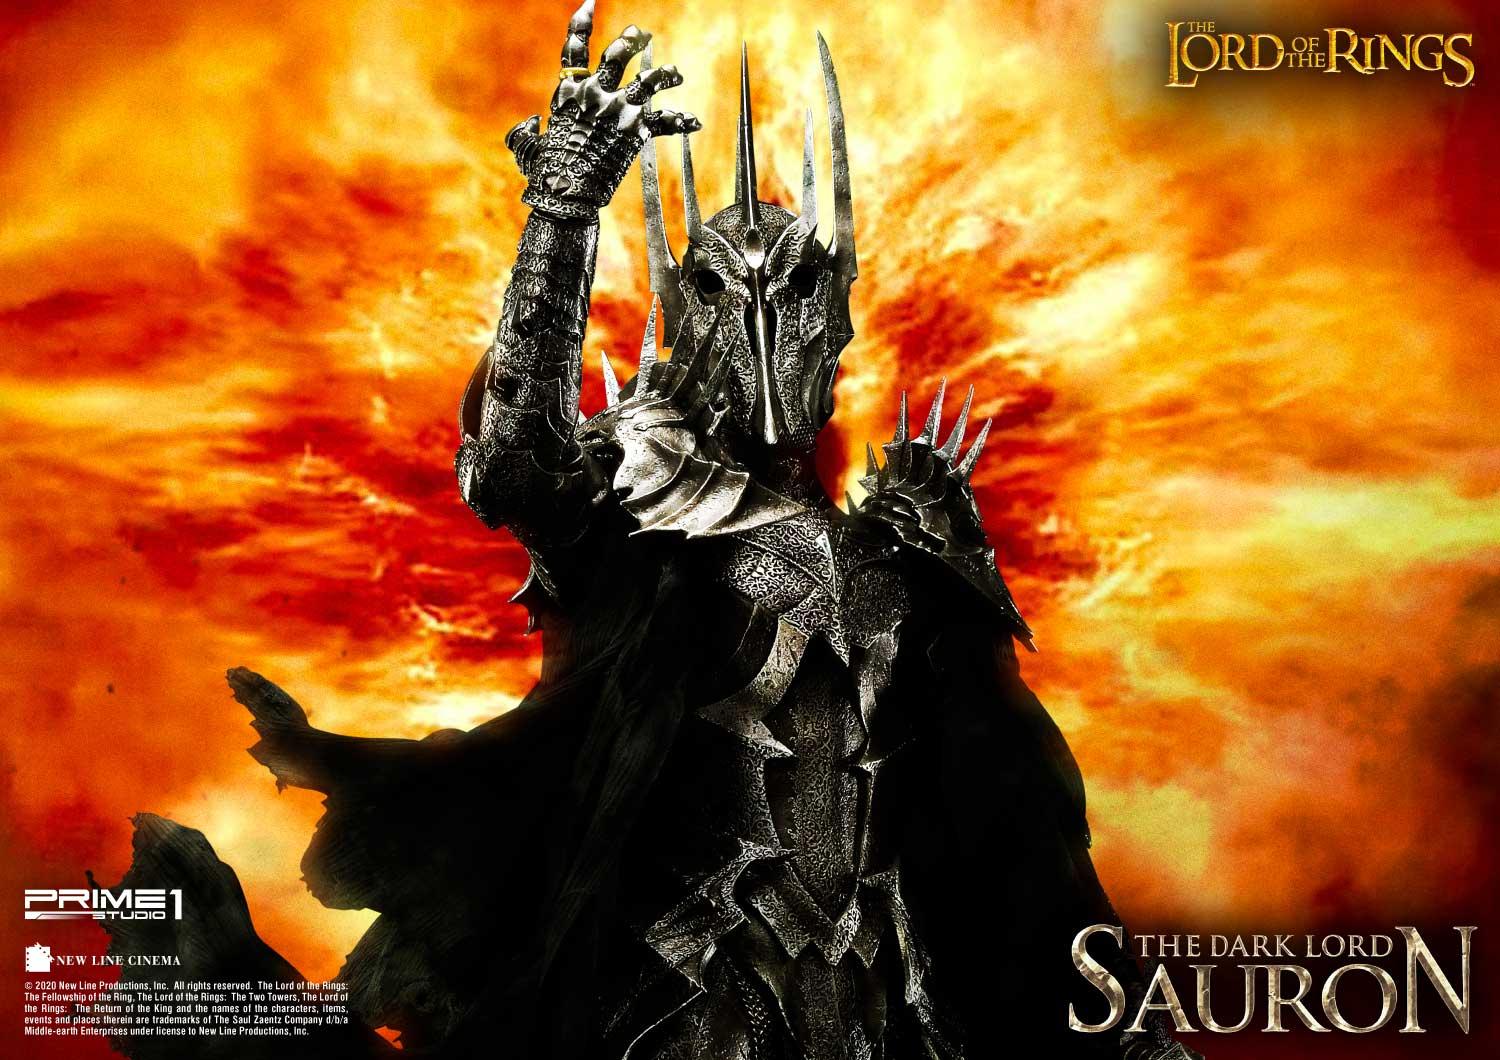 DAH-096 The Lord of the Rings Dark Lord Sauron